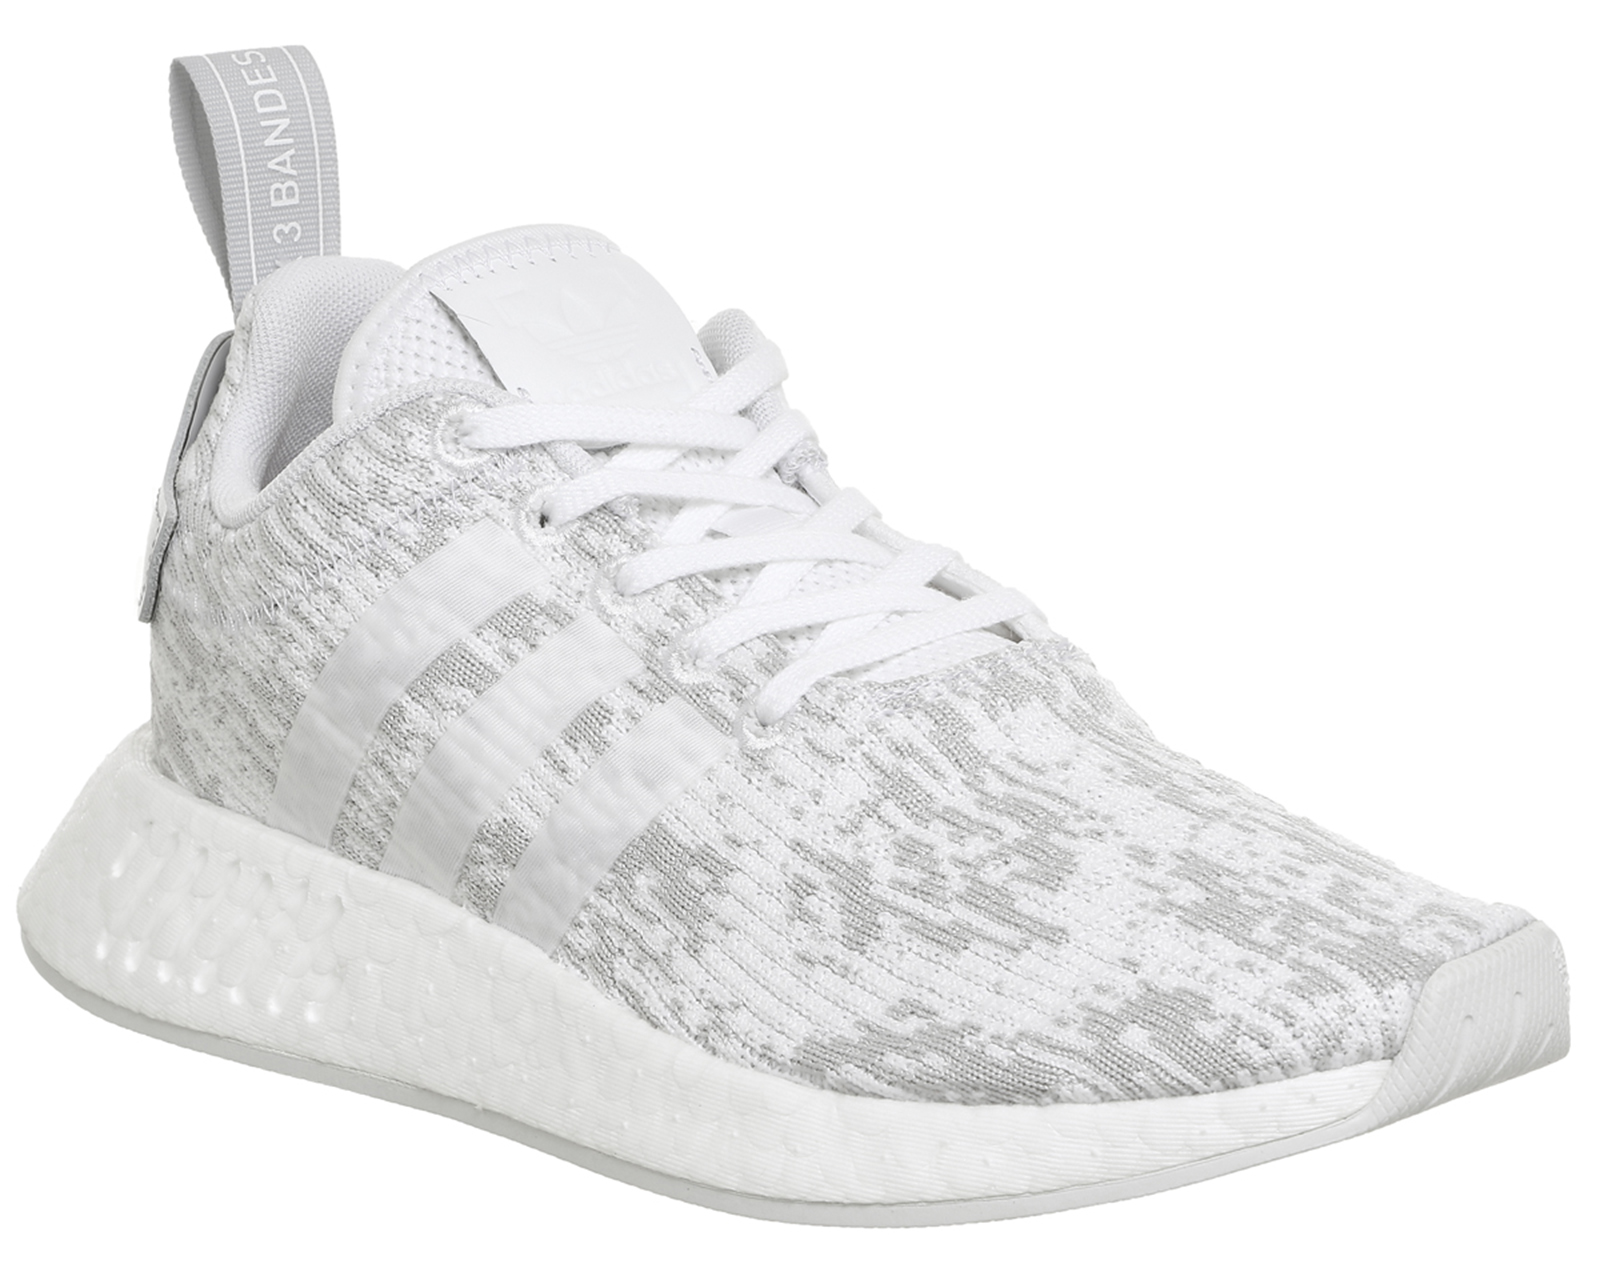 adidas Nmd R2 White Grey Two - Hers 